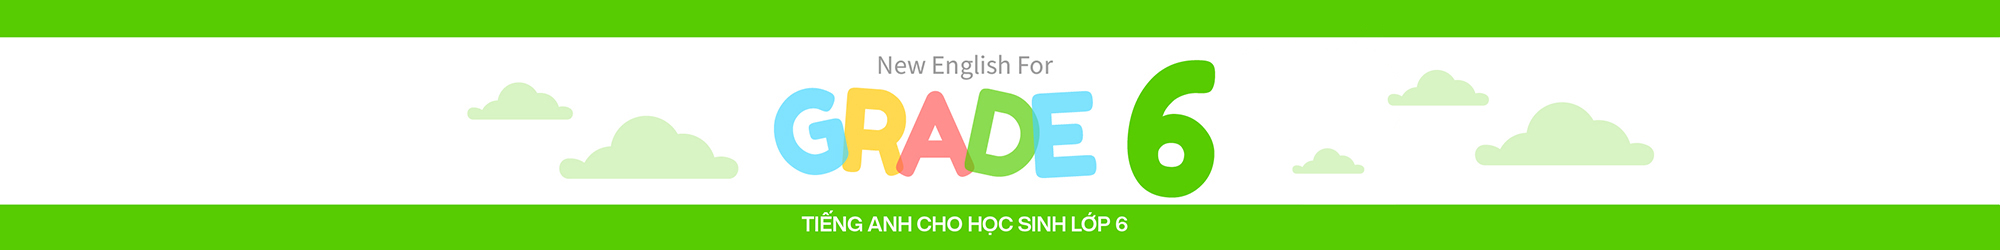 NEW ENGLISH FOR GRADE 6